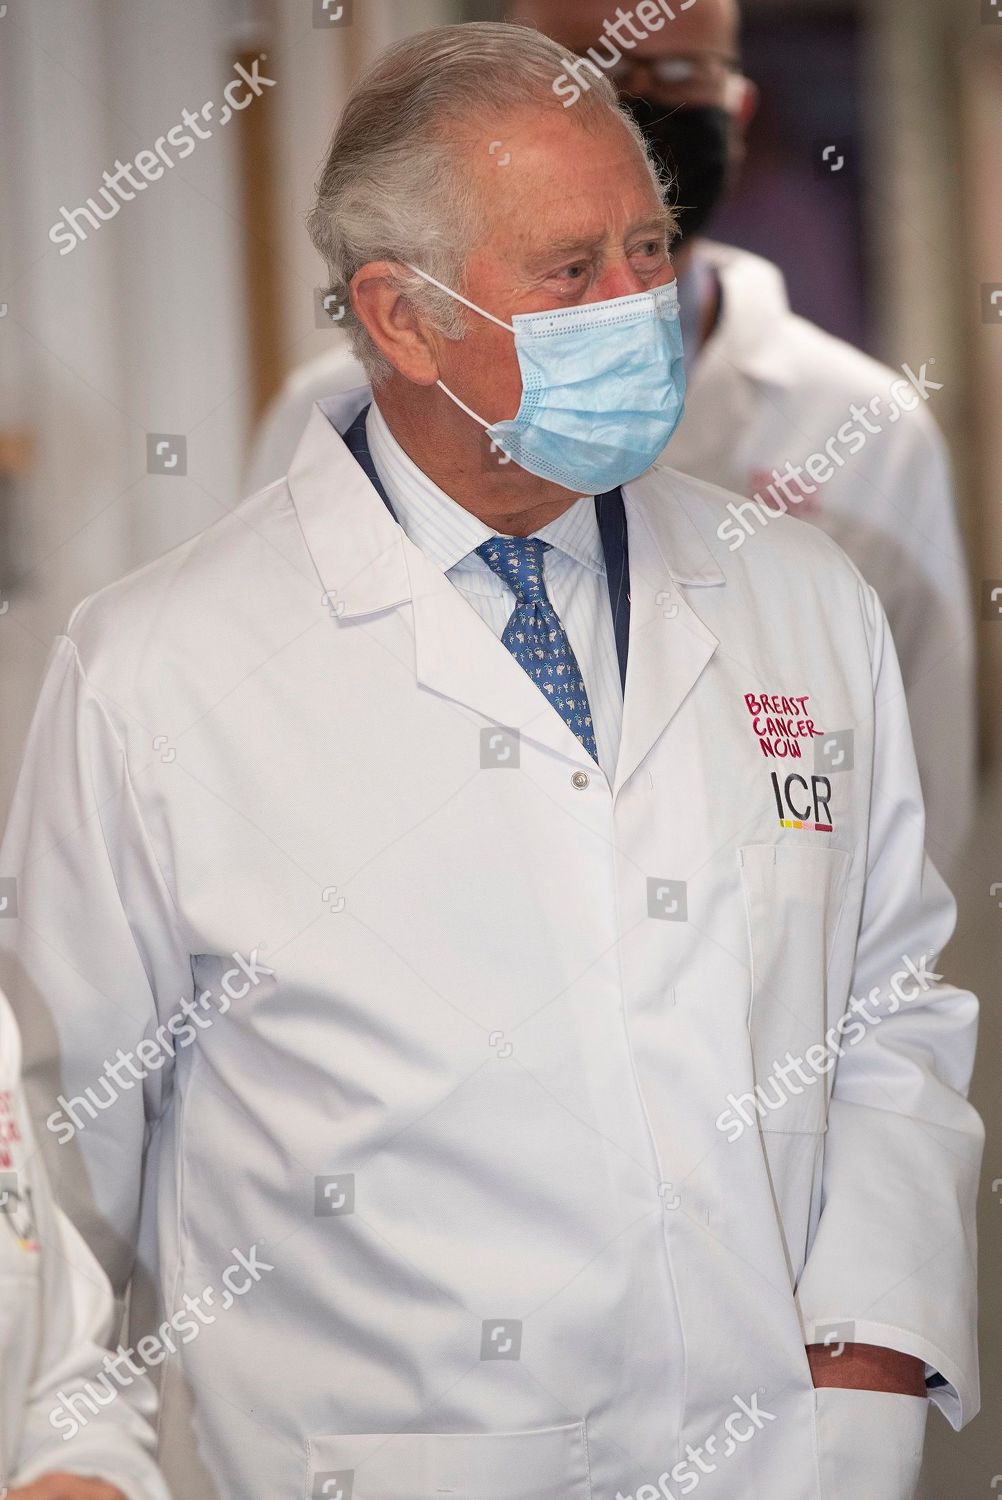 prince-charles-visits-the-breast-cancer-now-toby-robins-research-centre-london-uk-shutterstock-editorial-11902309h.jpg